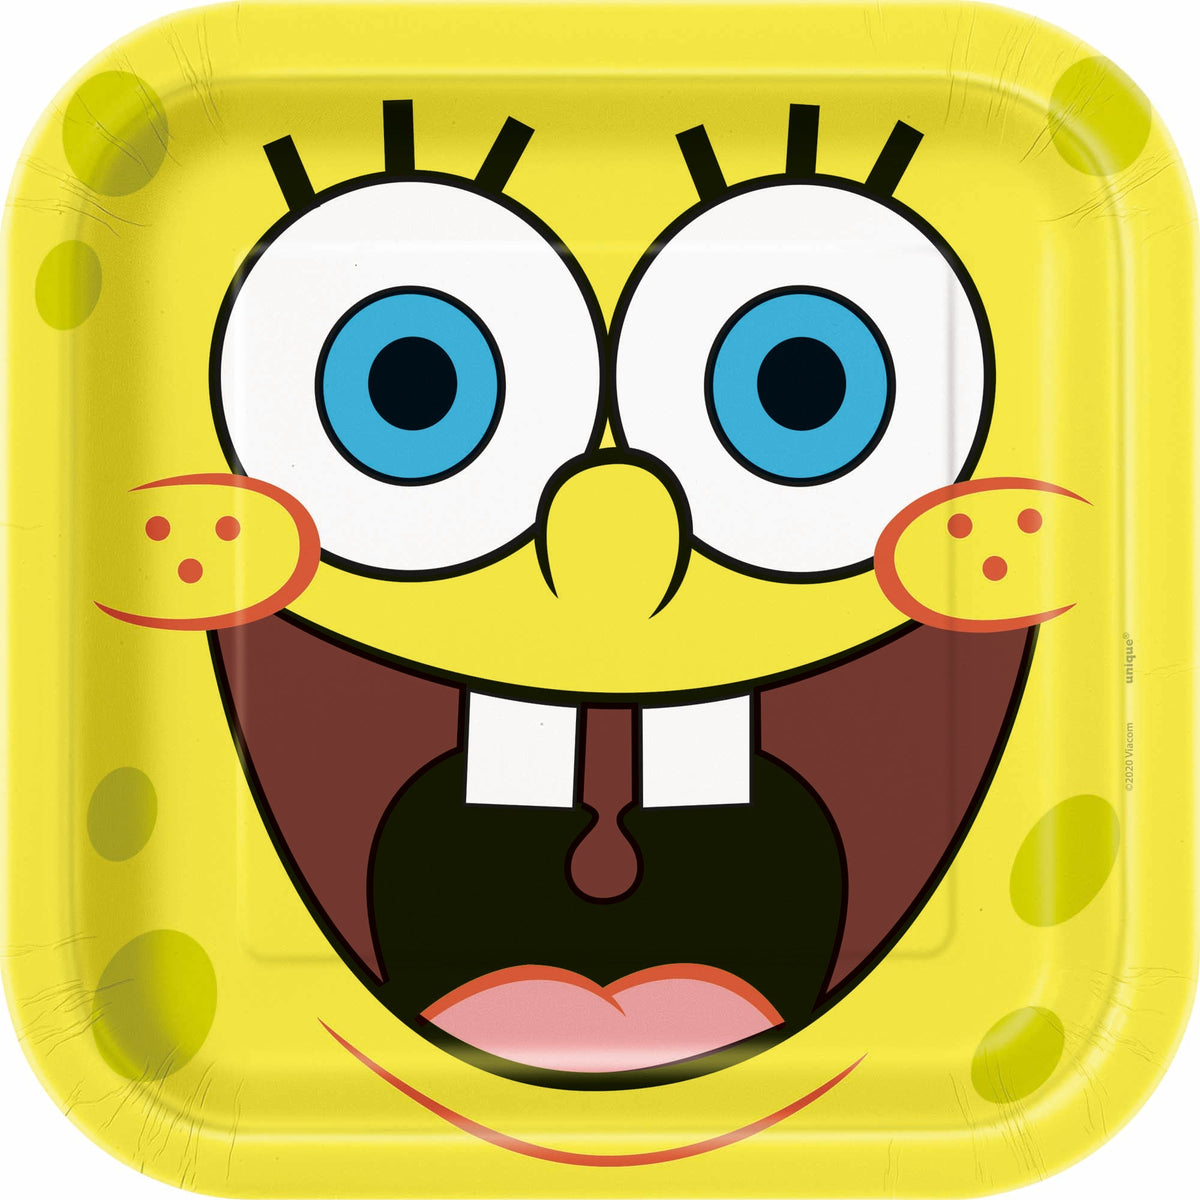 AMSCAN CA Kids Birthday SpongeBob SquarePants Large Square Lunch Paper Plates, 9 Inches, 8 Count